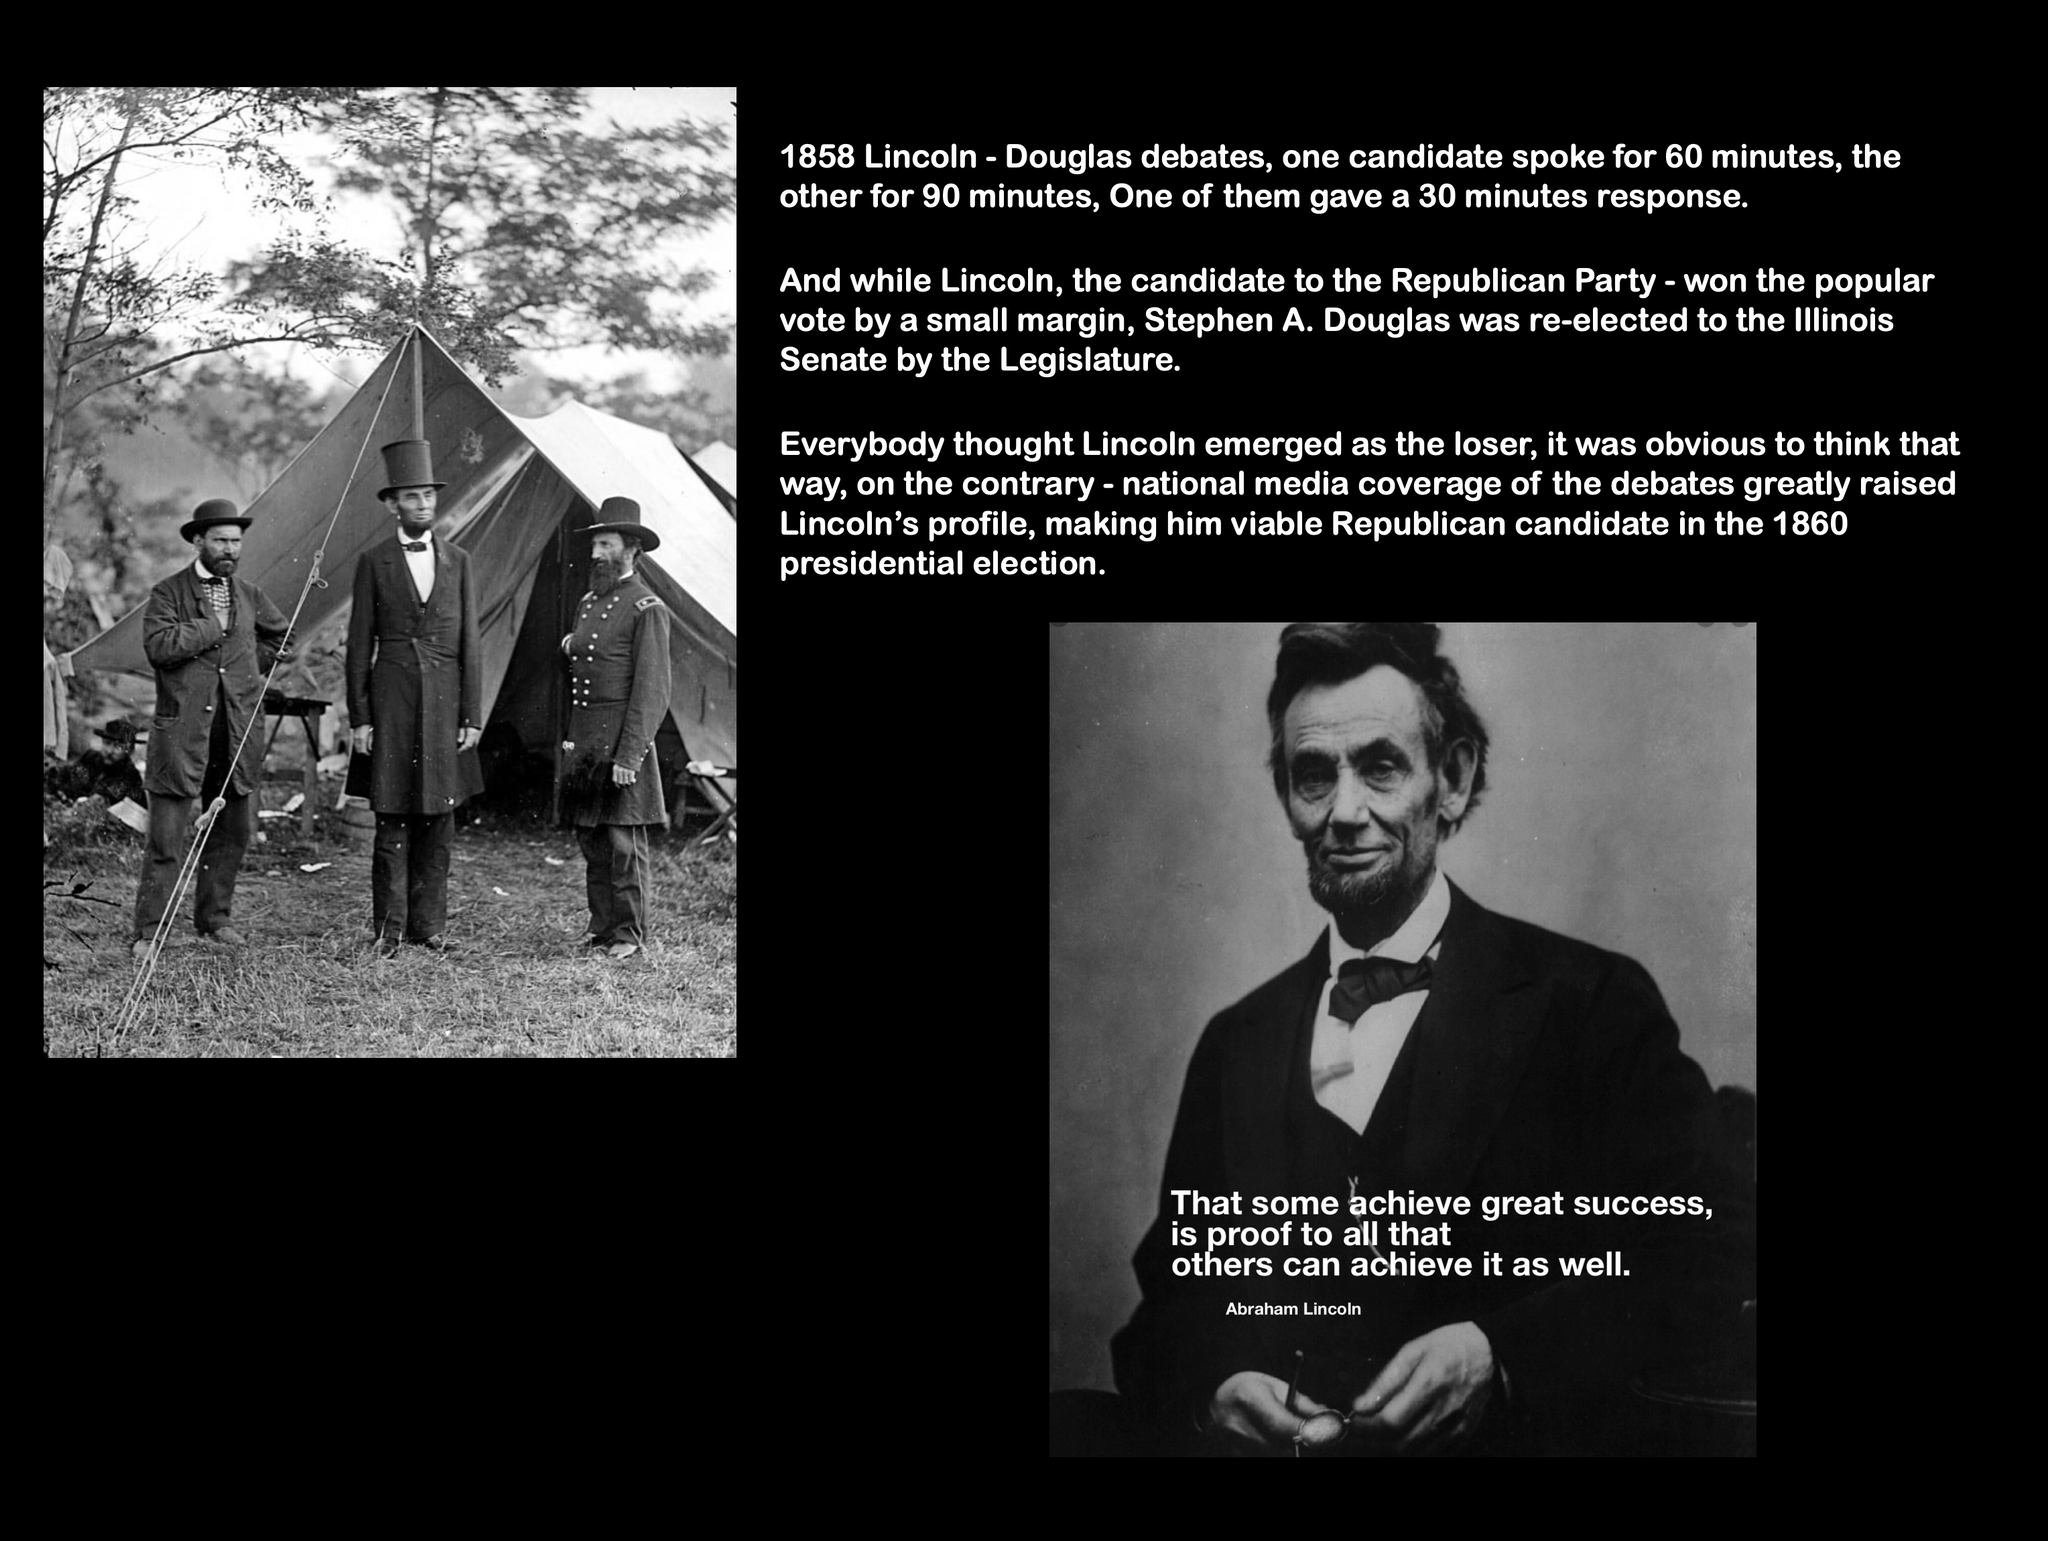 Abraham Lincoln  one of the greatest underdogz in history